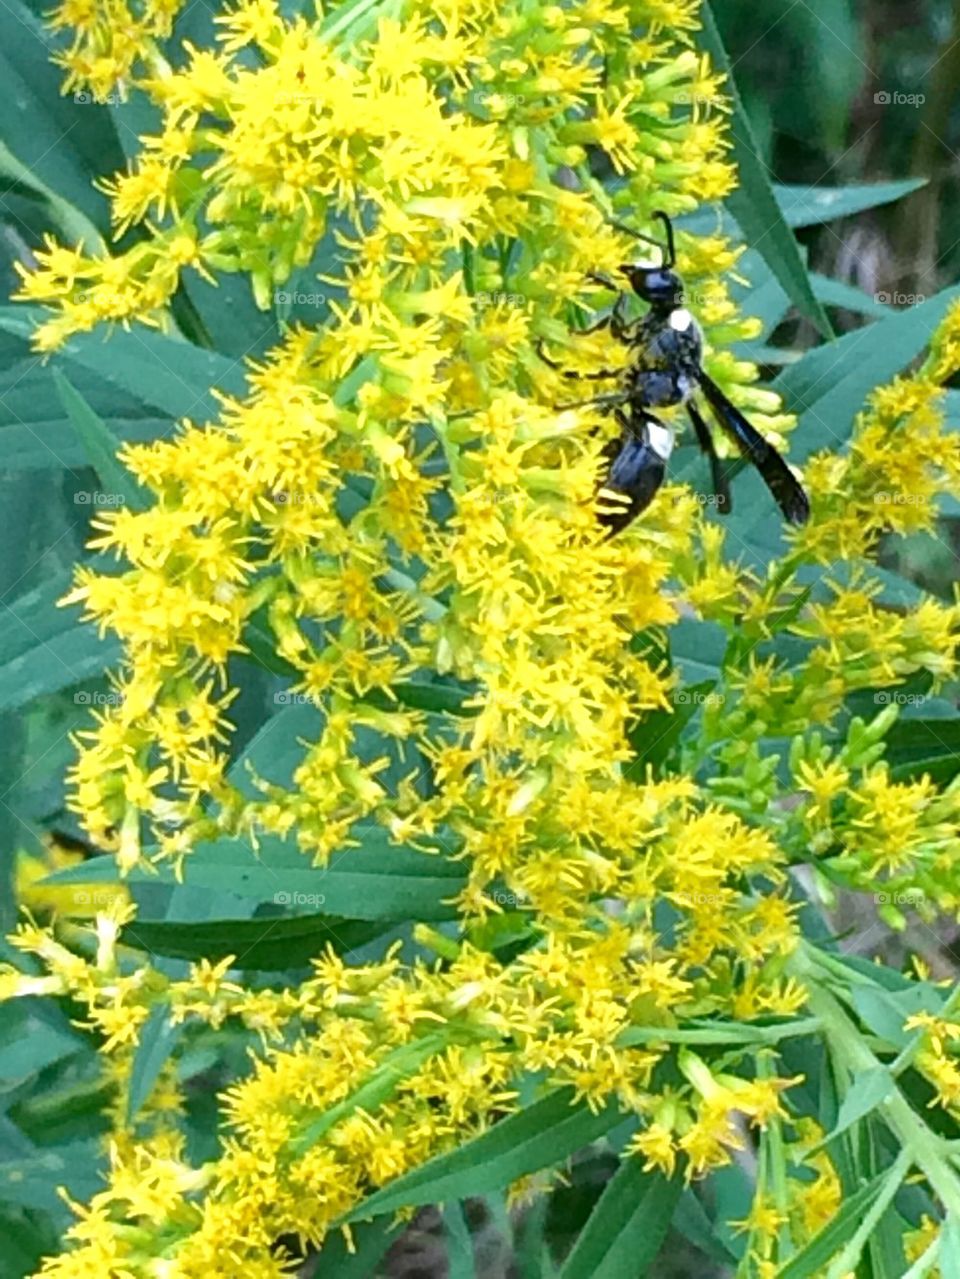 Goldenrod with the stinger